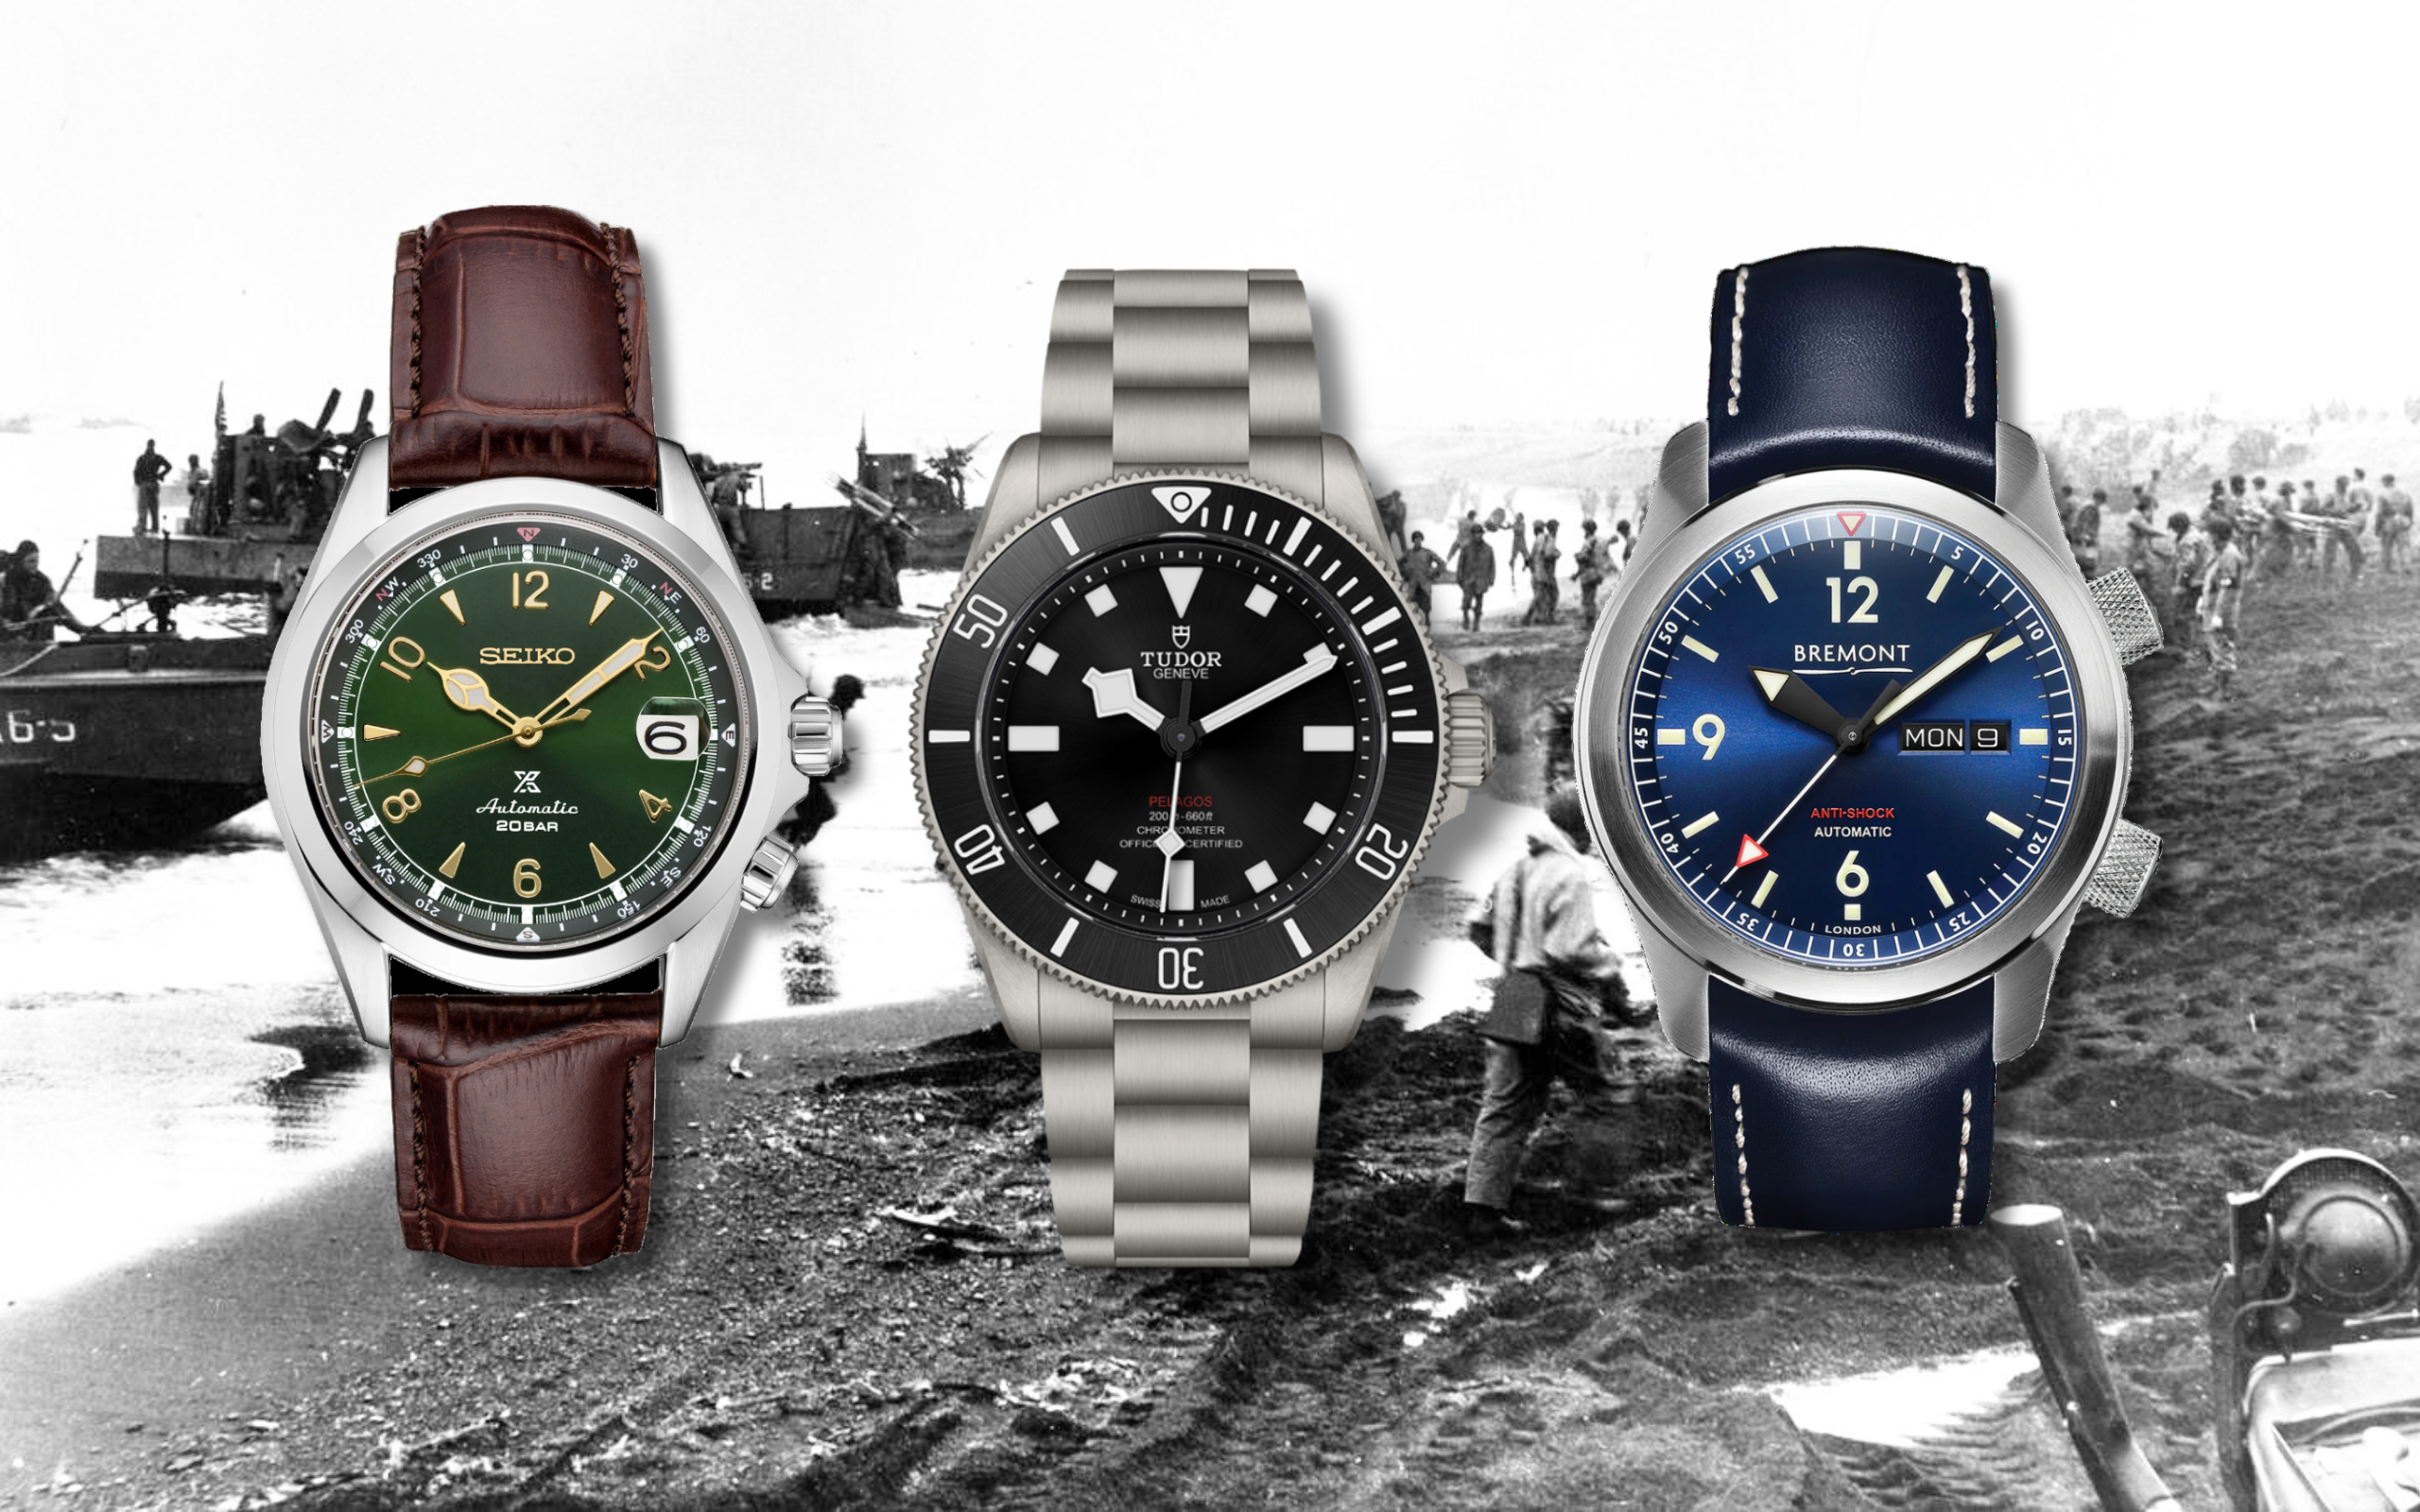 The Best Military Watches For Land, Sea, & Air